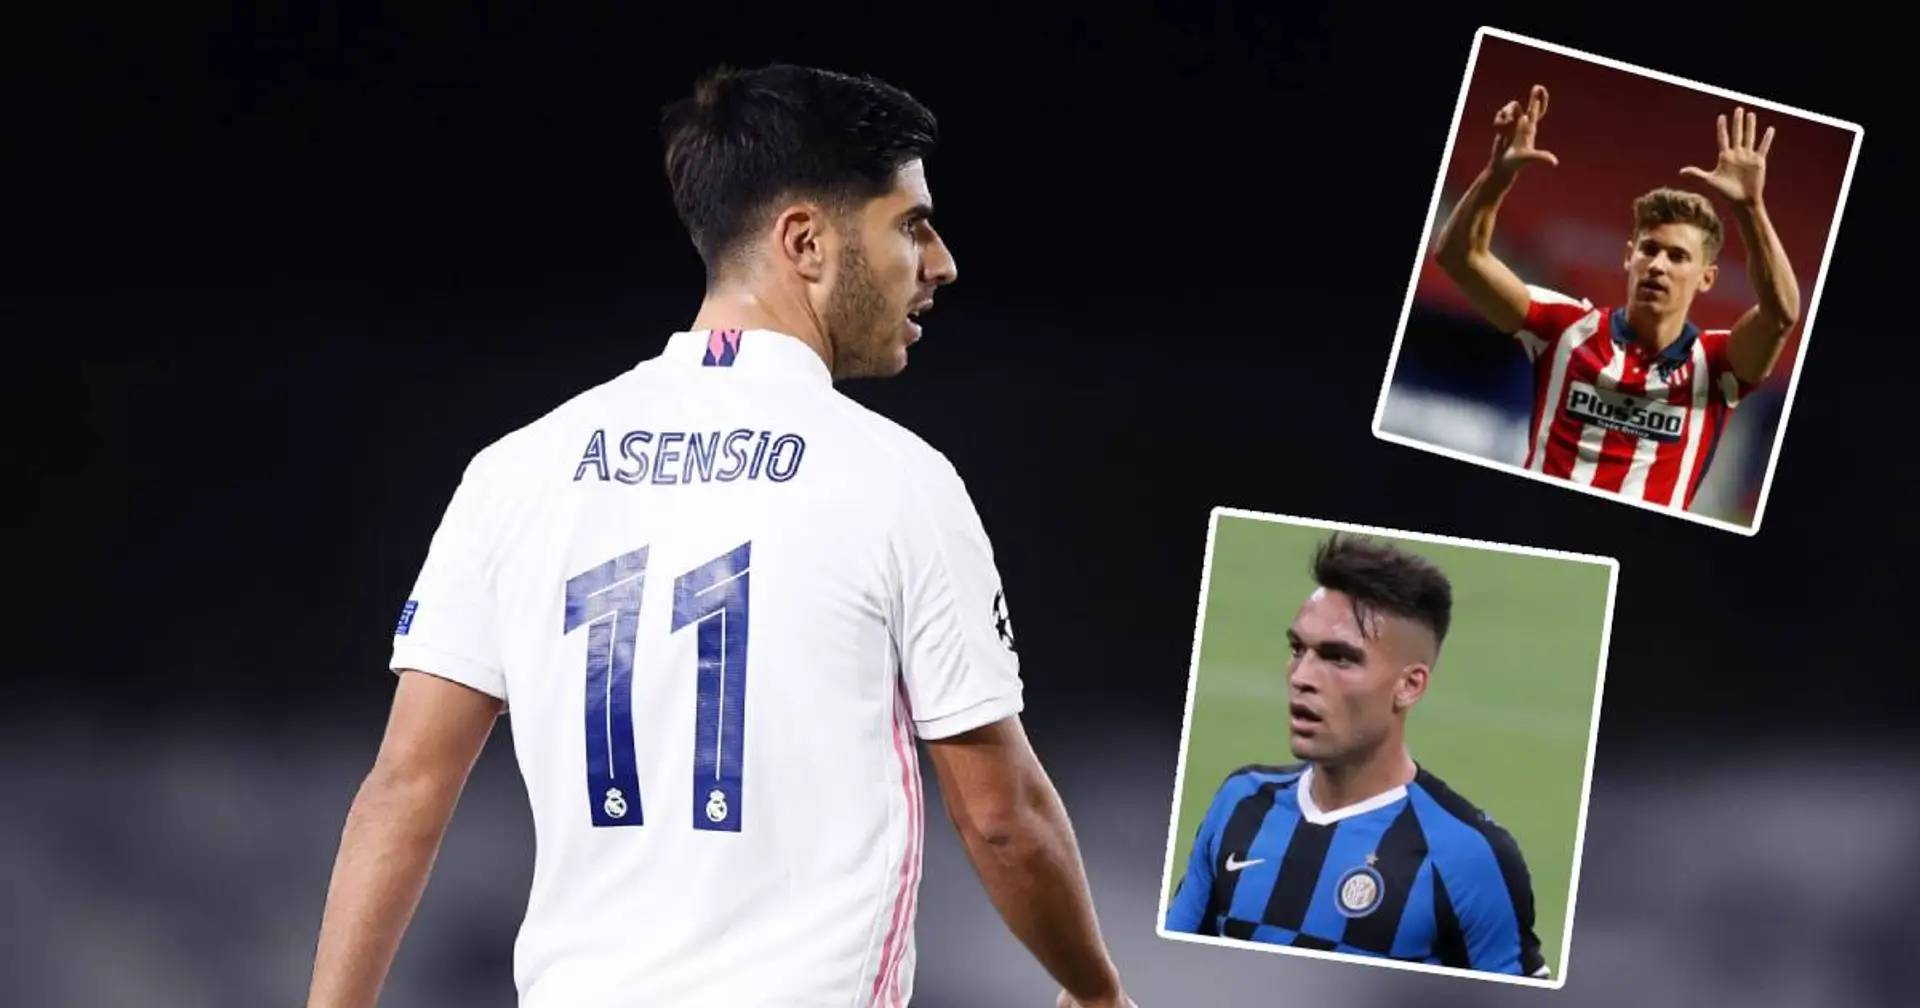 Fans offers interesting position switch to get the best out of Asensio